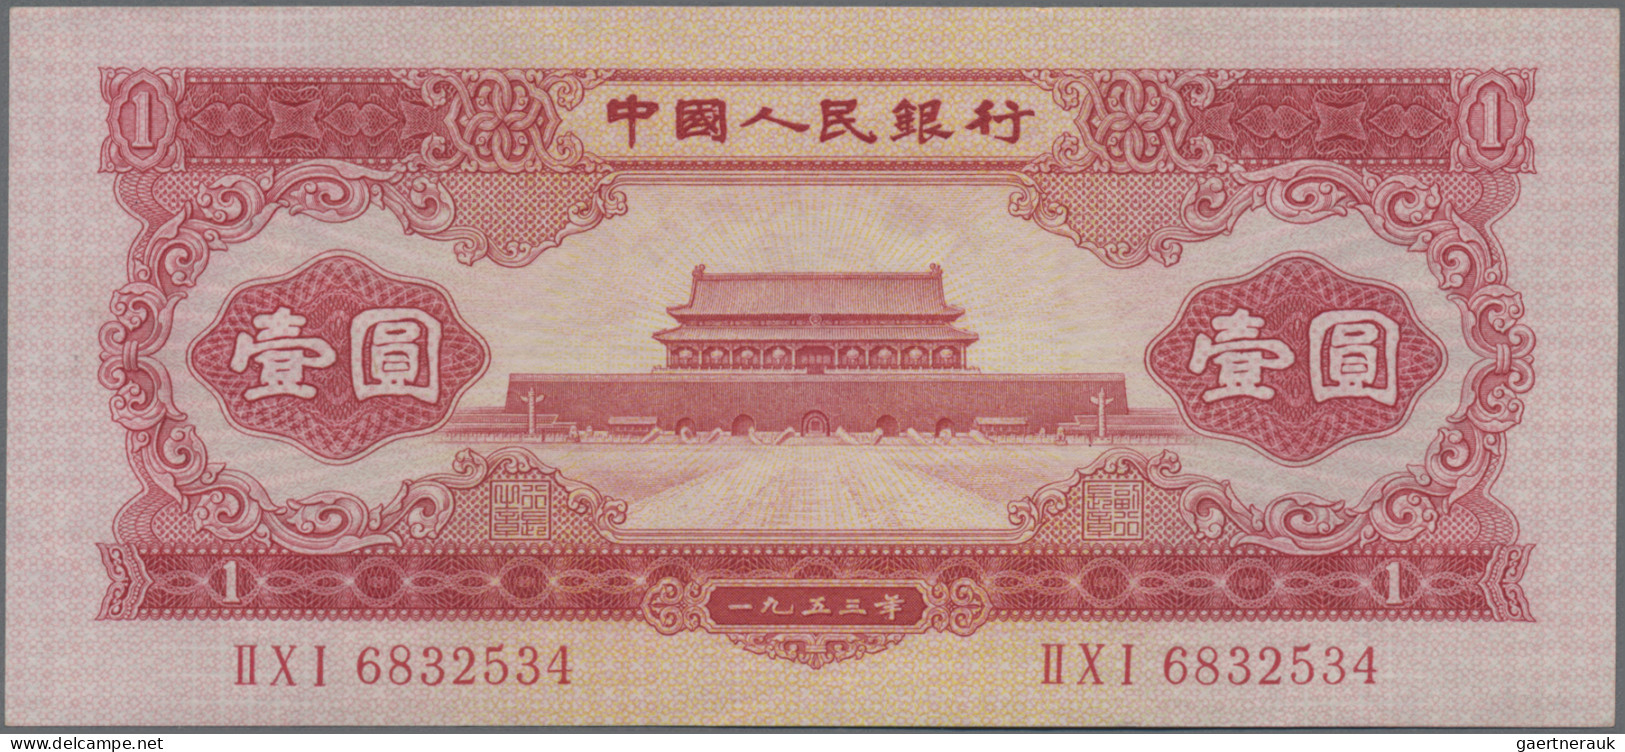 China: Peoples Republic Of China 1953 Second Series Set With 4 Banknotes Compris - Cina